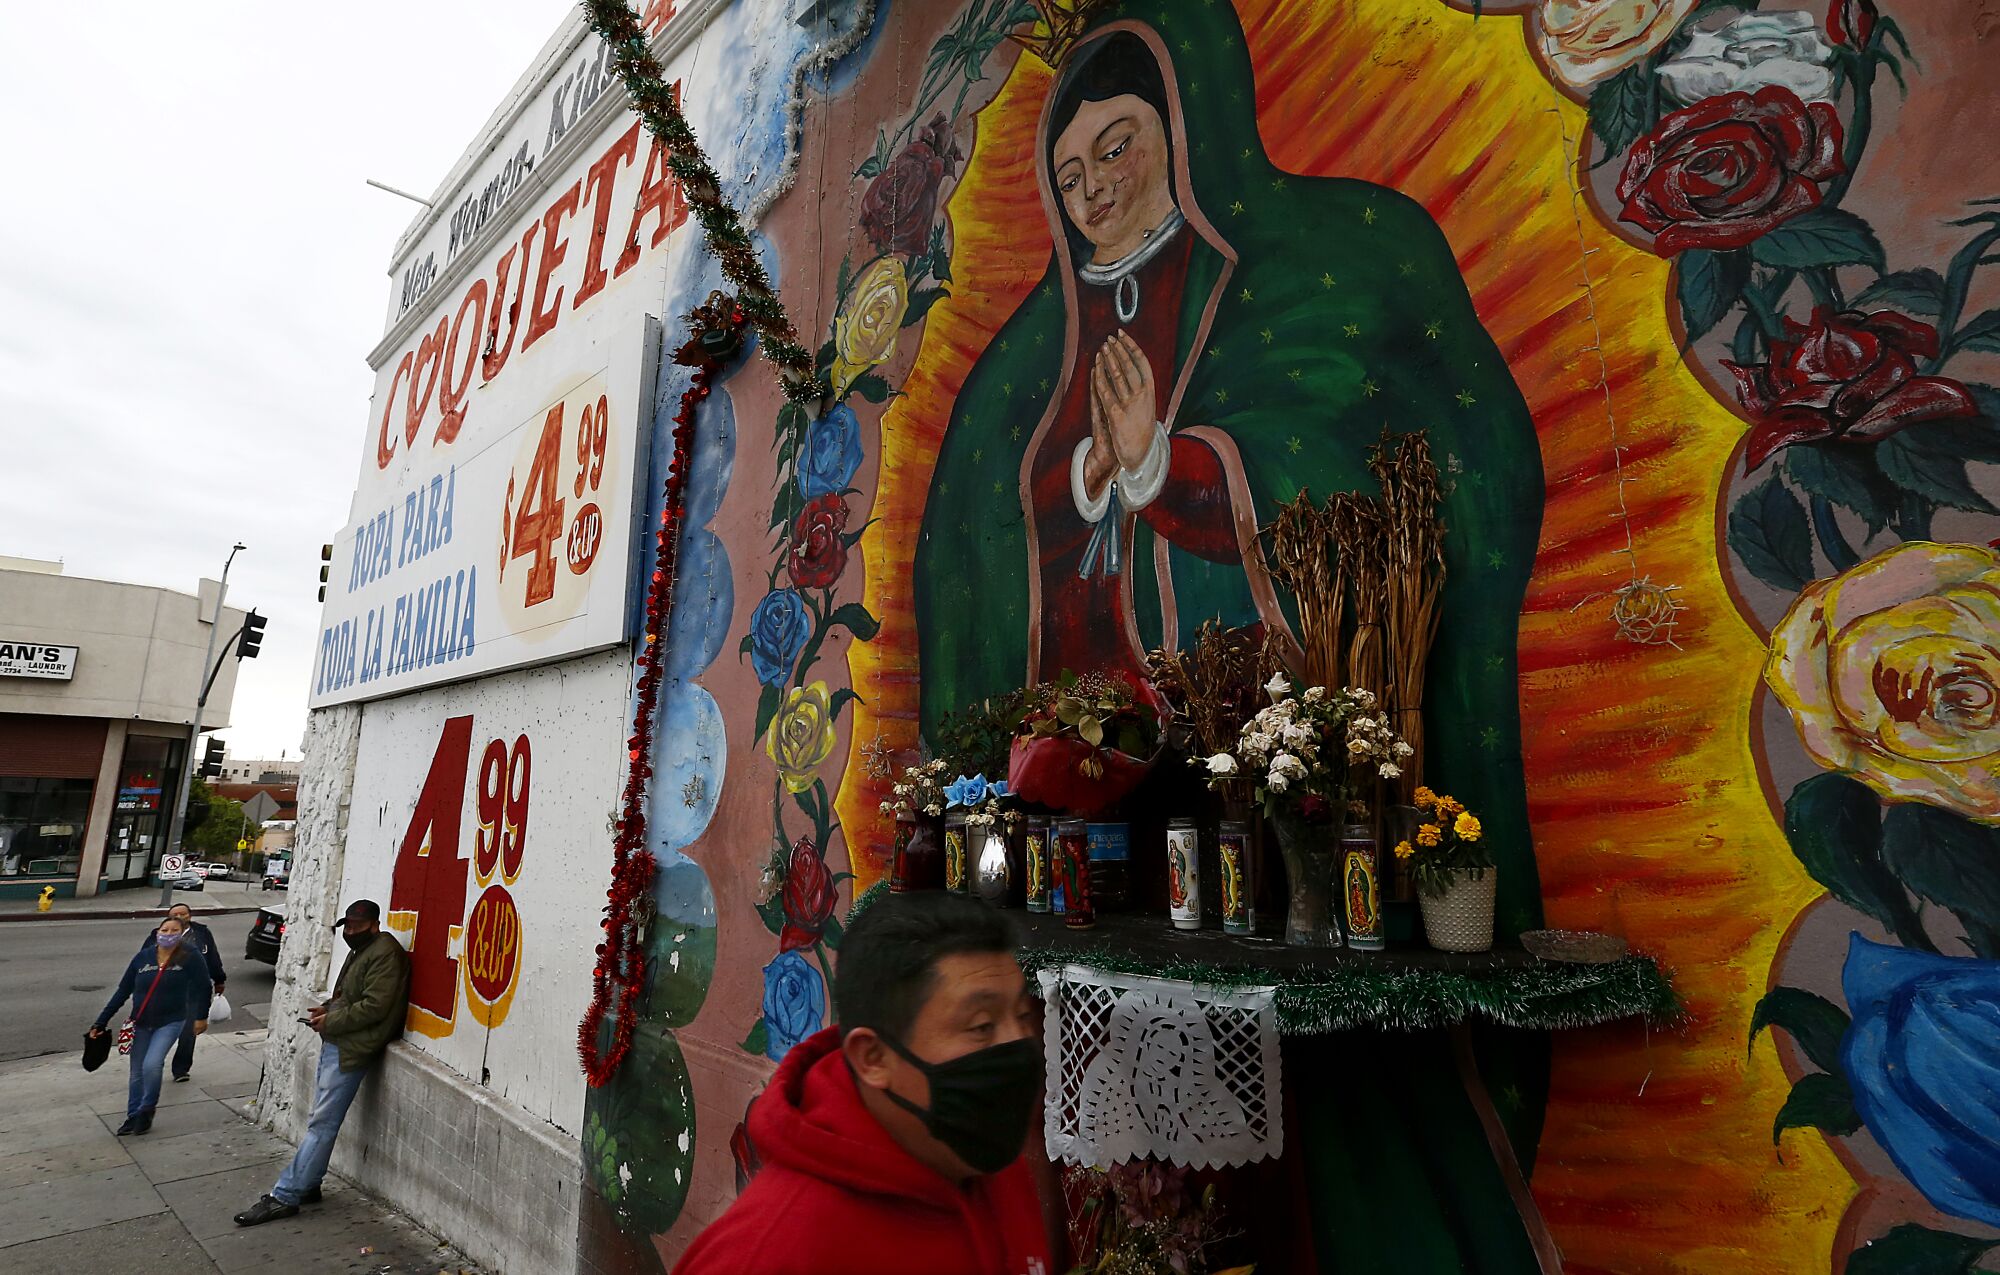 People walk past a mural of the Virgin of Guadalupe in the Westlake area of Los Angeles.